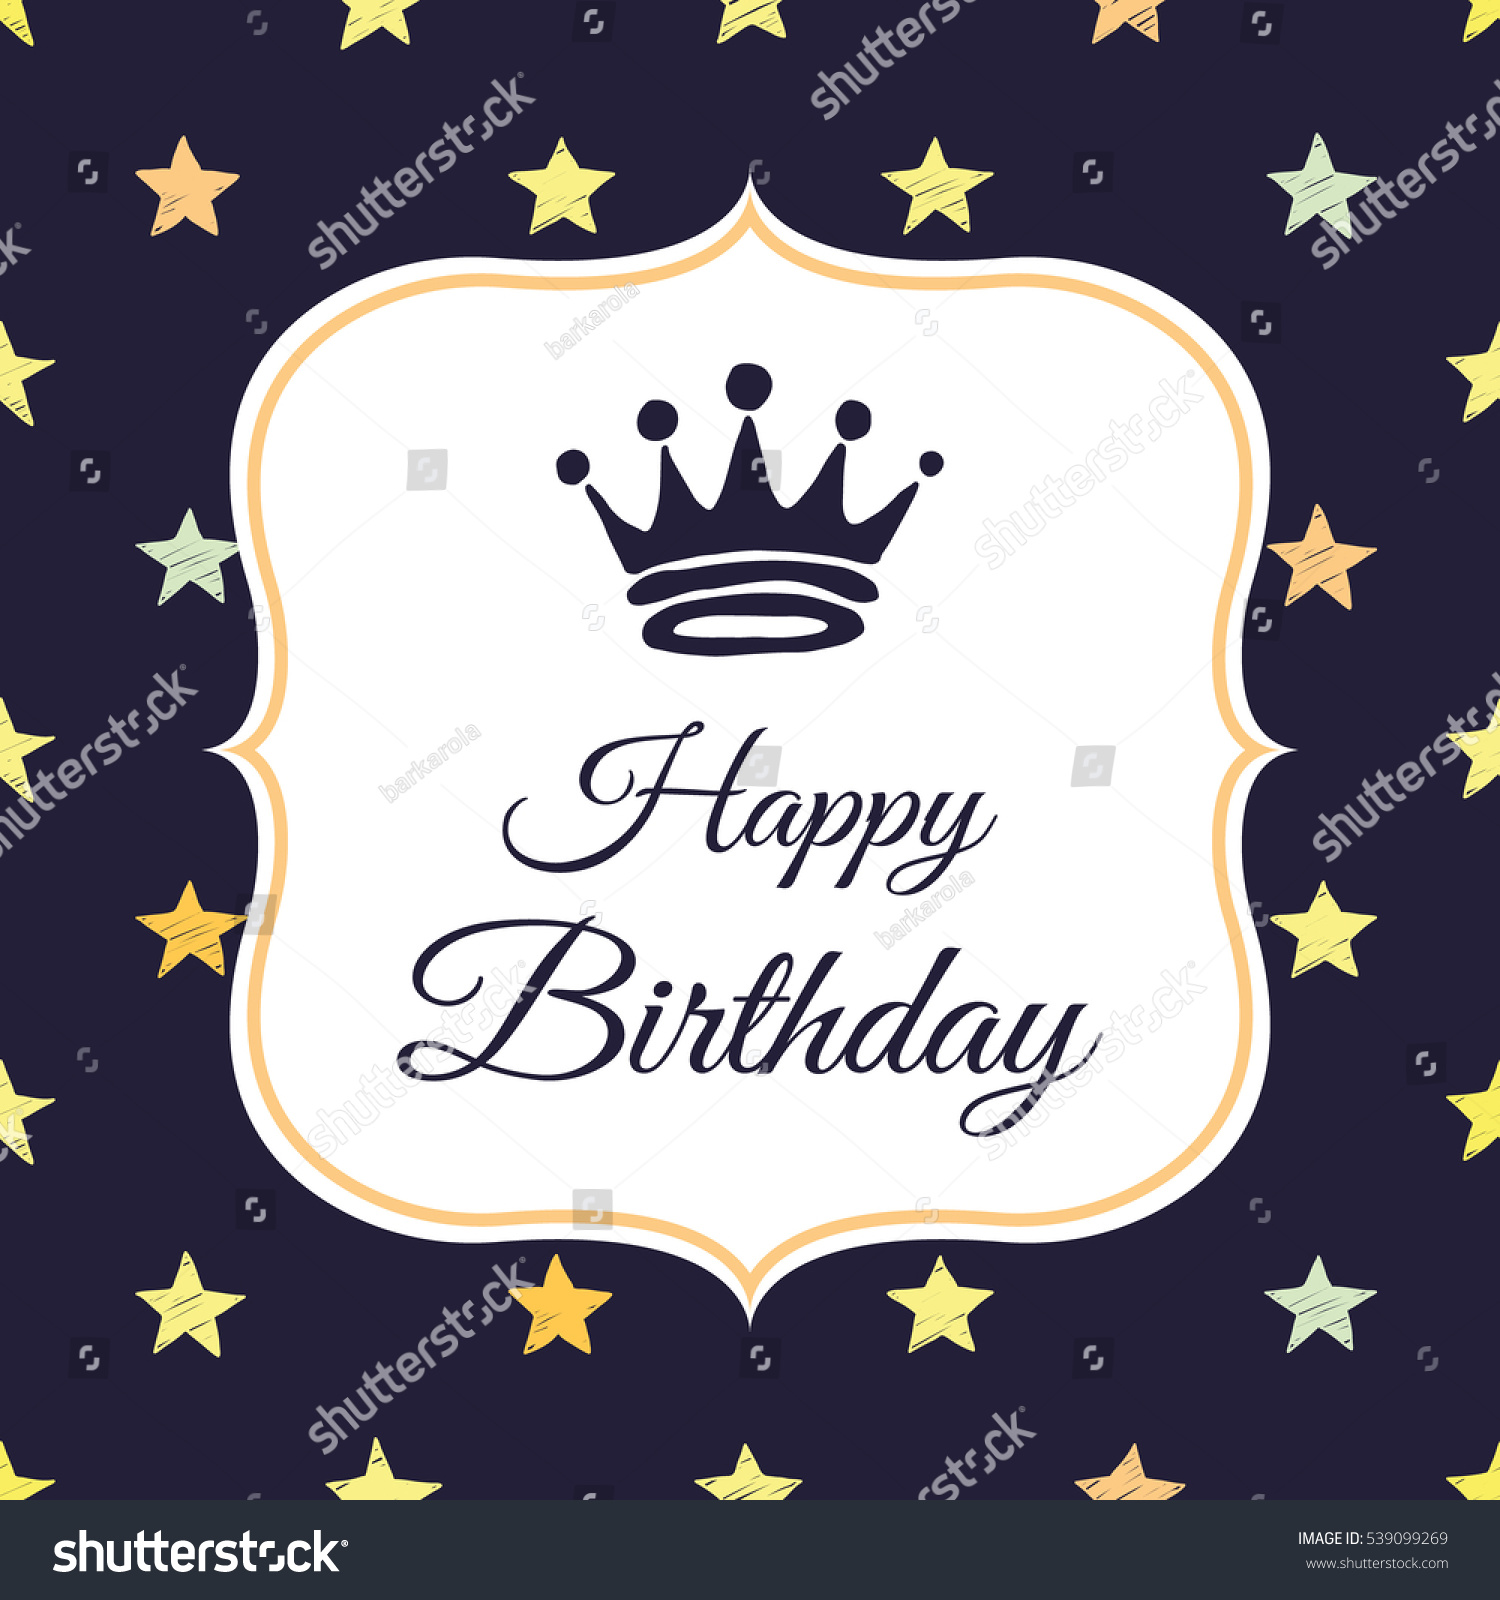 Download Cute Greeting Card With A Crown. "Happy Birthday" Message ...